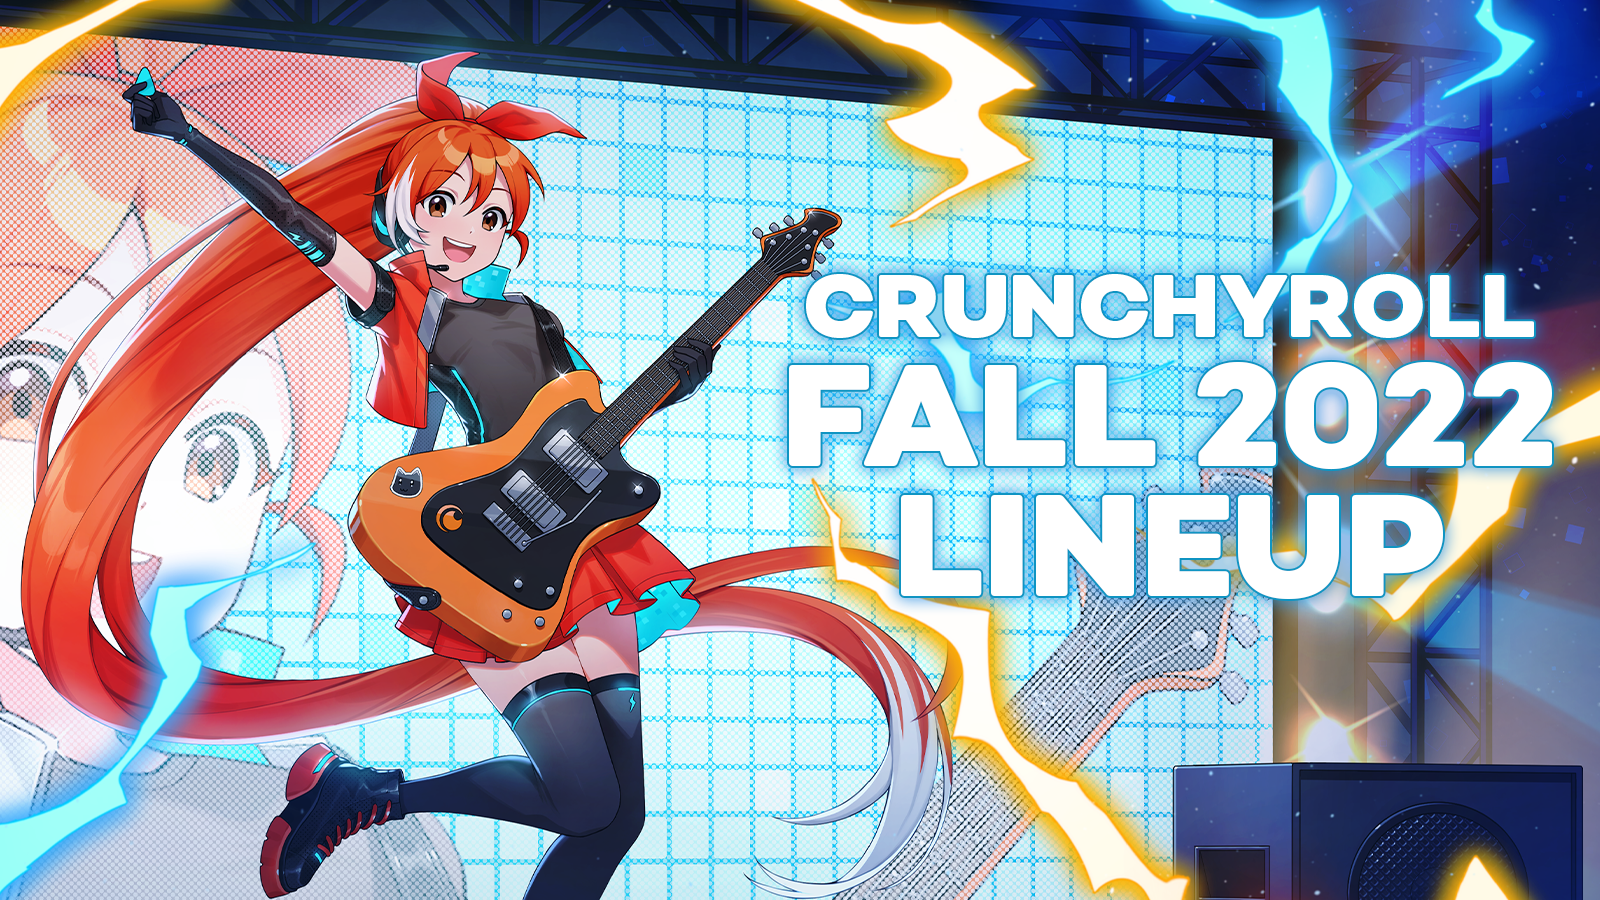 All the upcoming anime titles Crunchyroll showed off at SDCC 2022